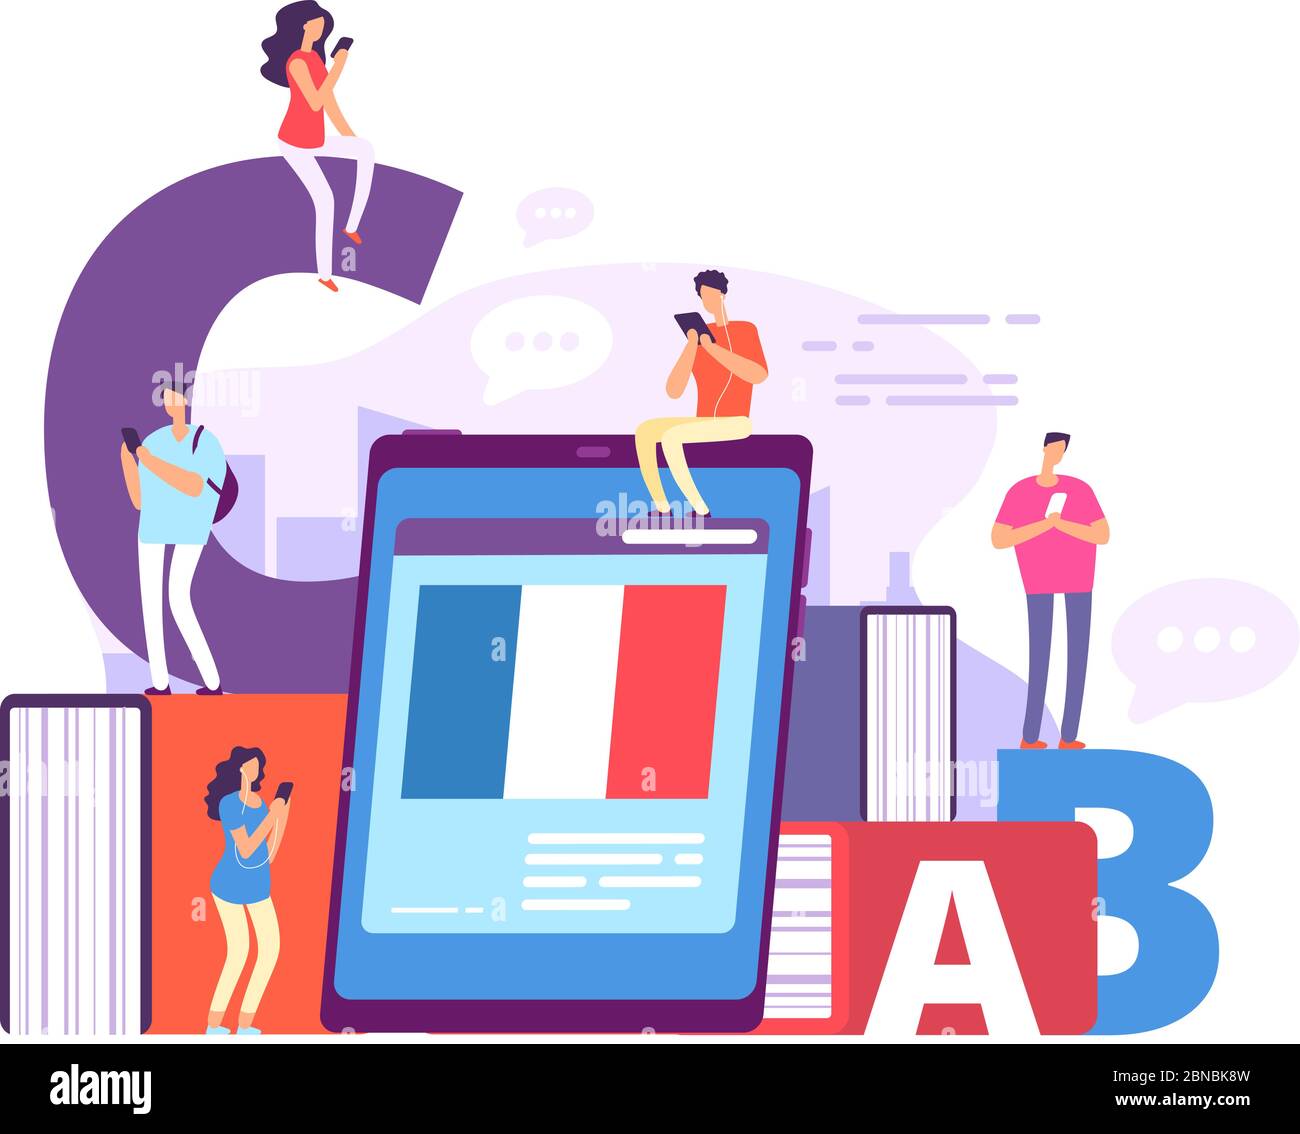 Foreign language online learning. People with smartphones studying french with online teacher. Education vector concept. Illustration of online training and teaching Stock Vector